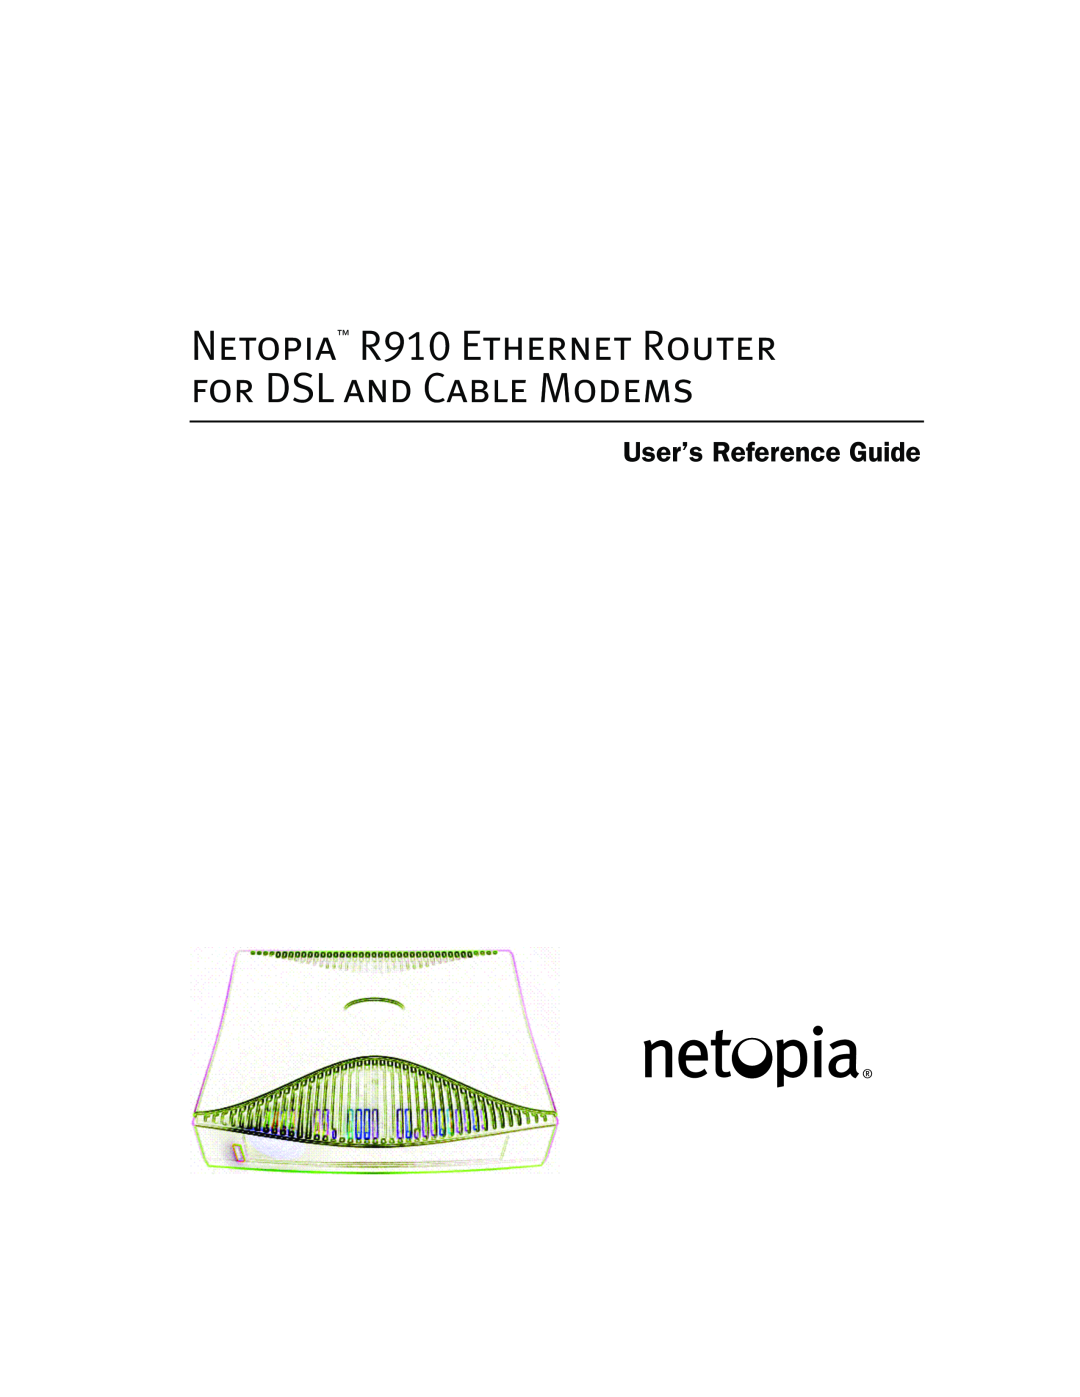 Netopia manual Netopia R910 Ethernet Router for DSL and Cable Modems, User’s Reference Guide 